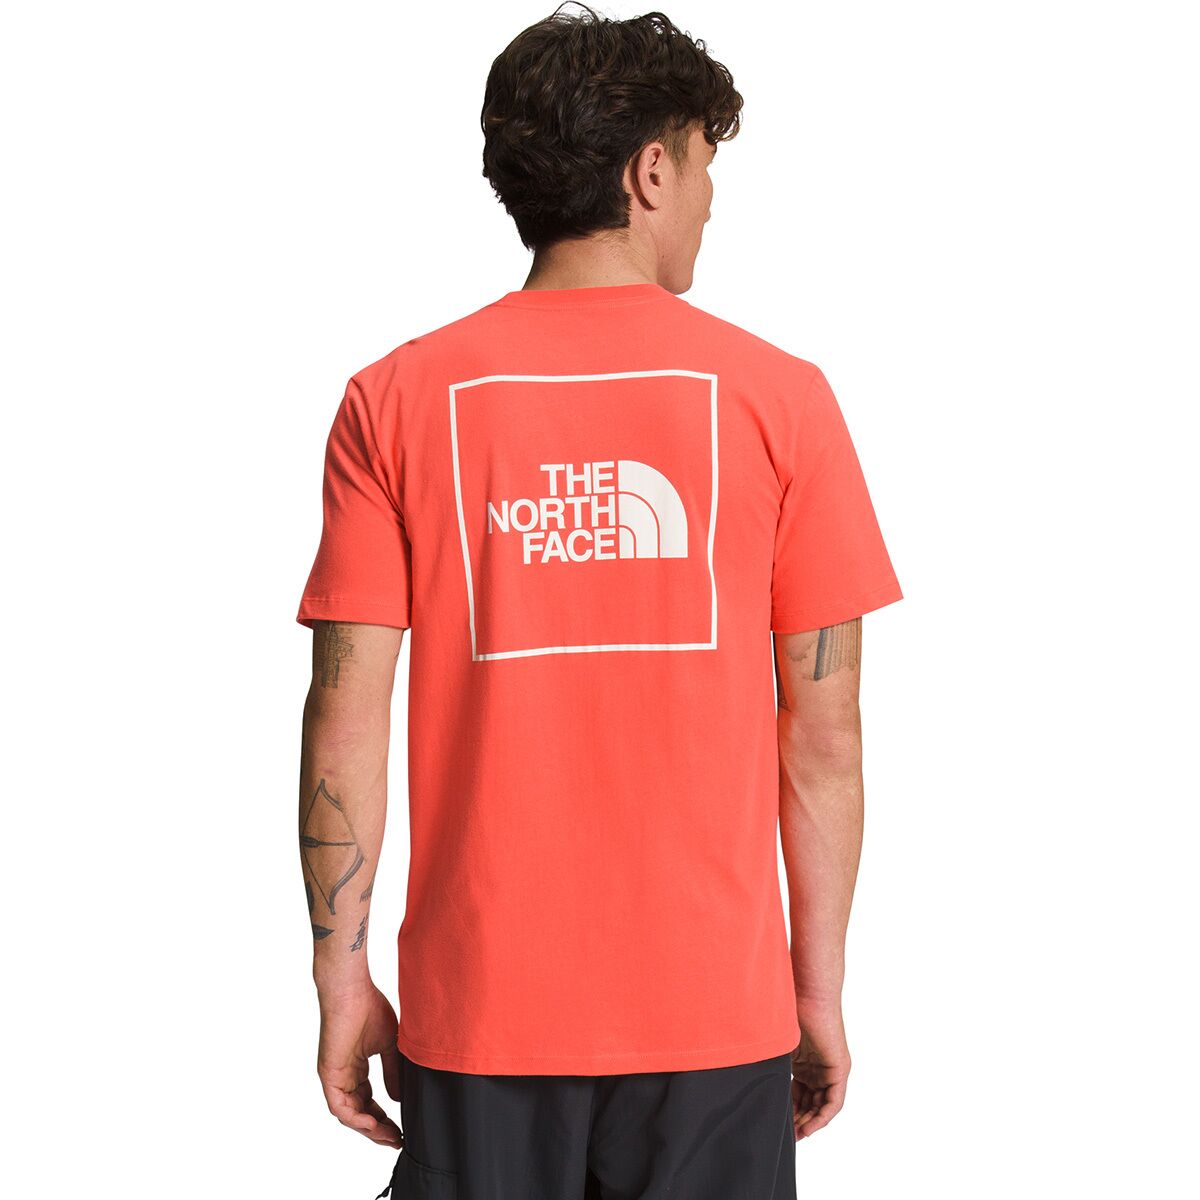 The North Face Brand Proud Short-Sleeve T-Shirt - Men's